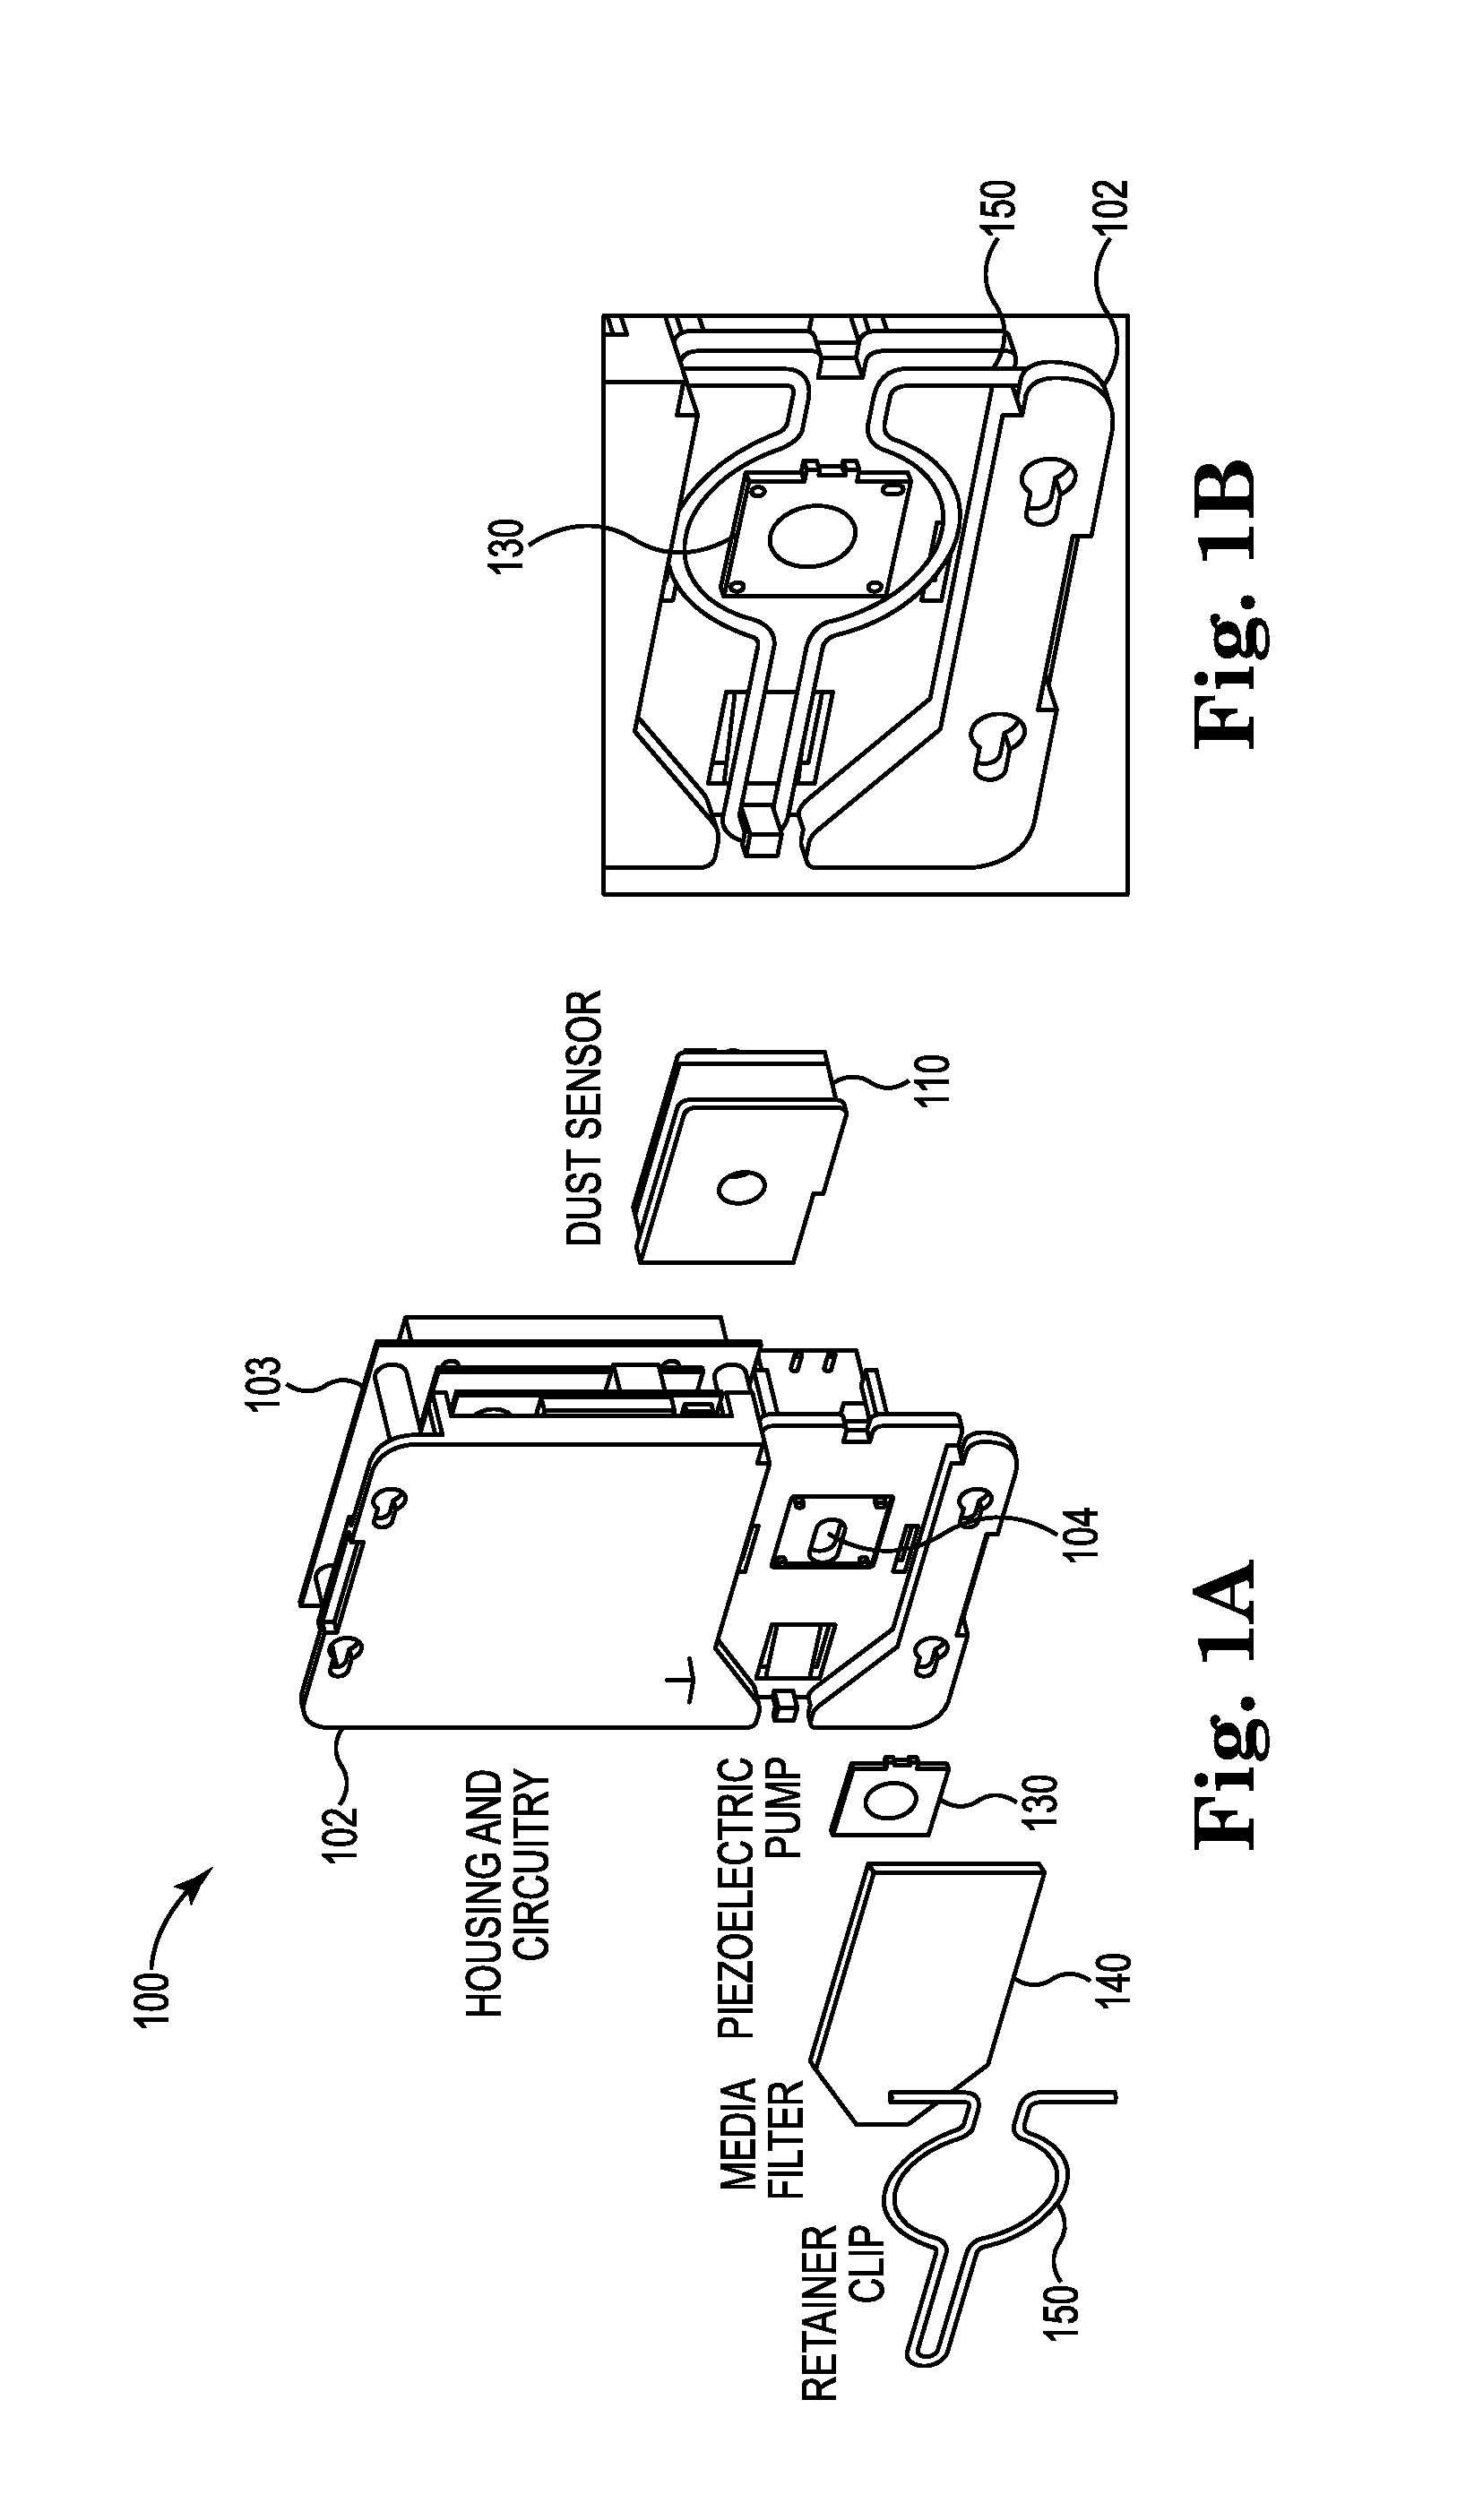 System and method of conducting particle monitoring using low cost particle sensors